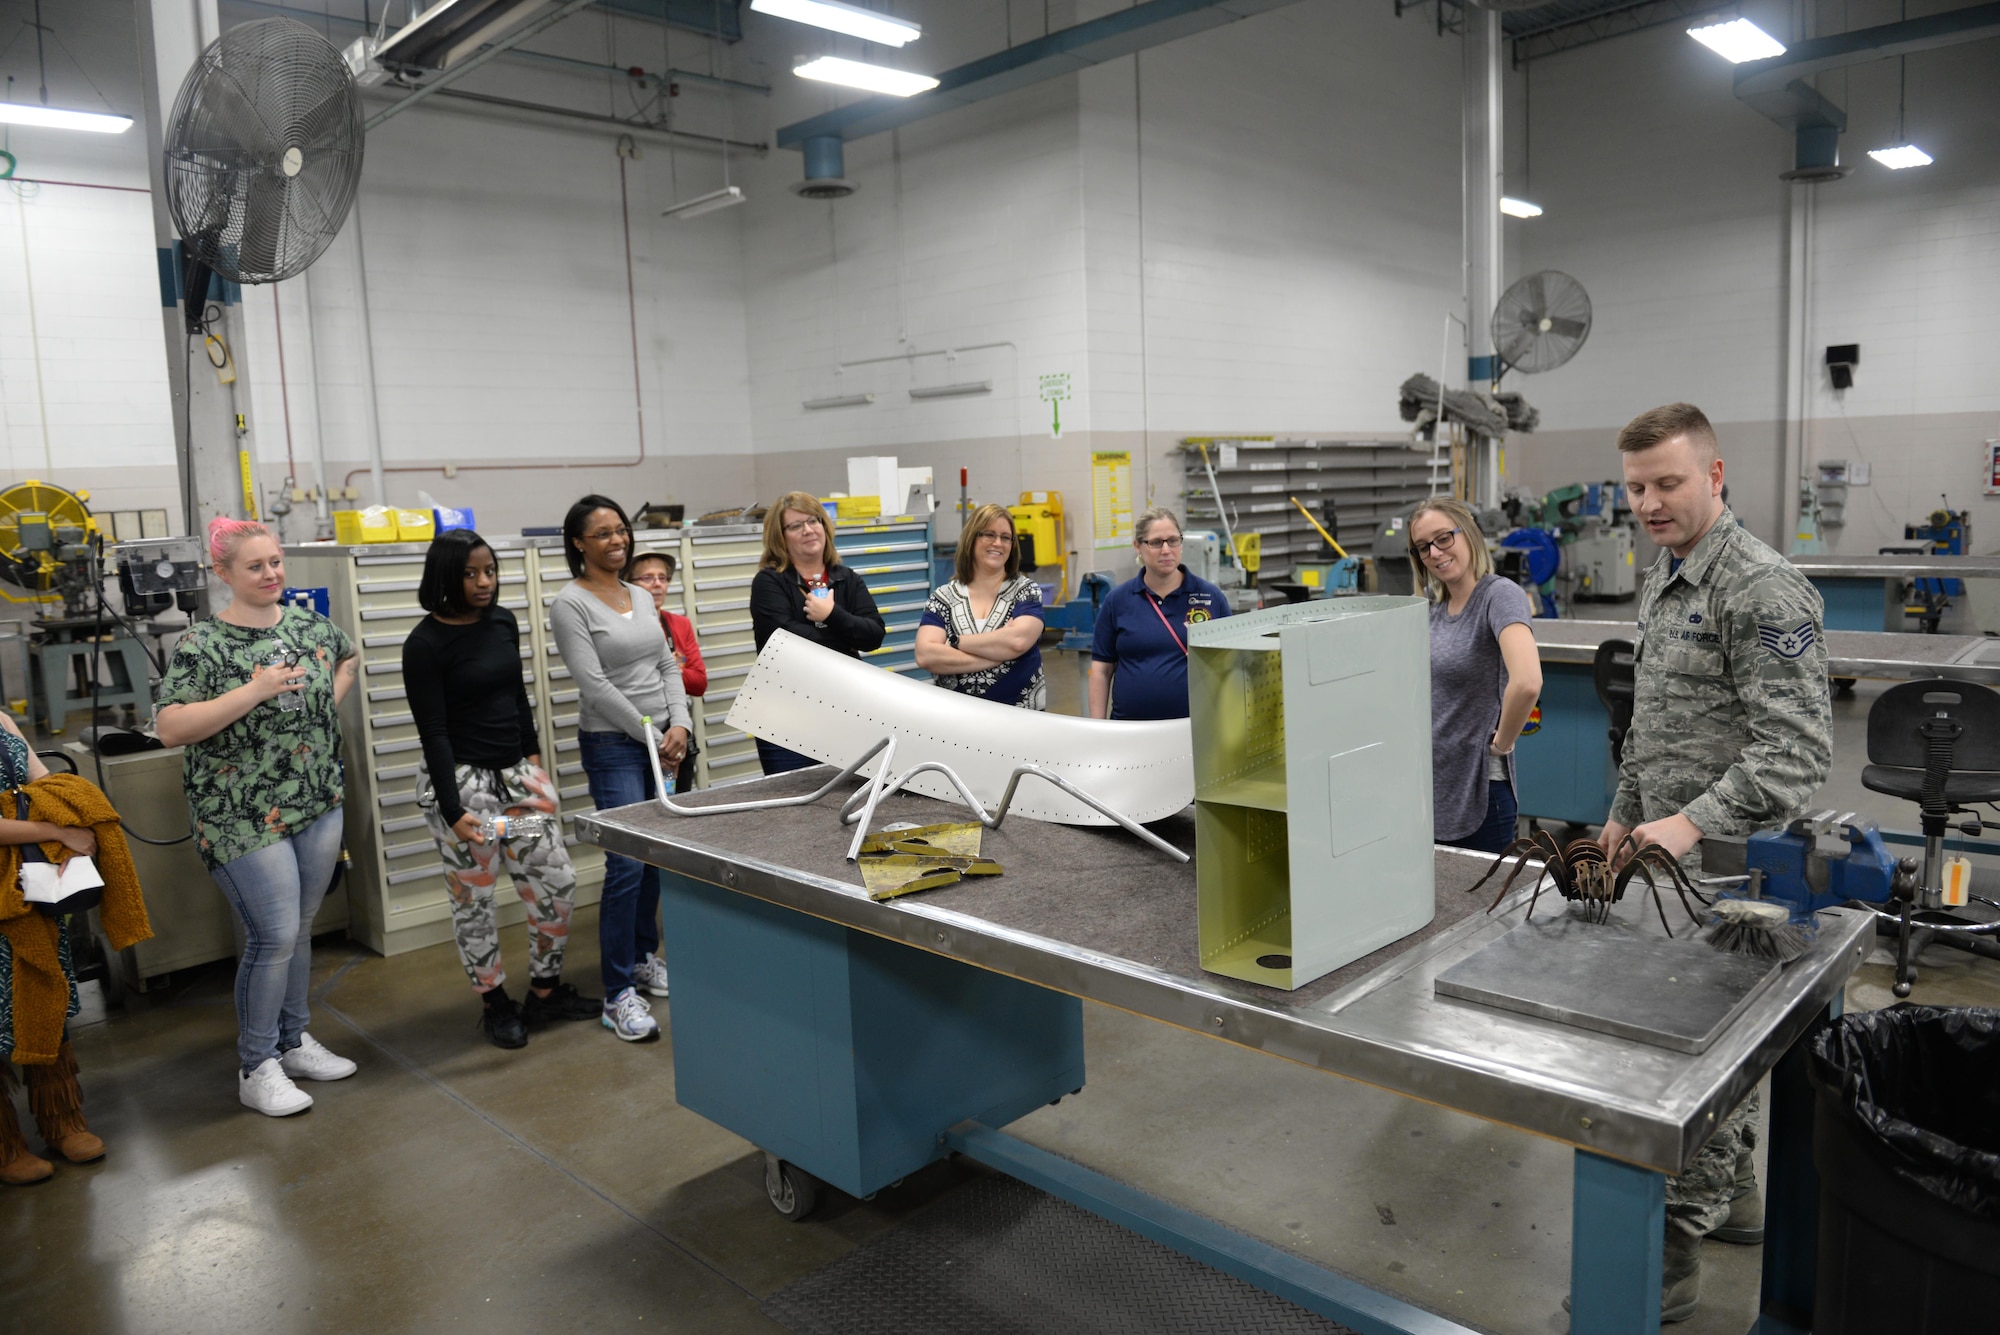 Staff Sgt. Konrad Jazwierski, 55th Maintenance Squadron aircraft structural maintenance technician, shows 55th MXS spouses the sheet metal shop in the Bennie L. Davis Maintenance Facility at Offutt Air Force Base, Neb., Feb. 17, 2017. Members of the 55th MXS had a chance to show their spouses what they do for the Air Force.(U.S. Air Force photo by Zachary Hada)